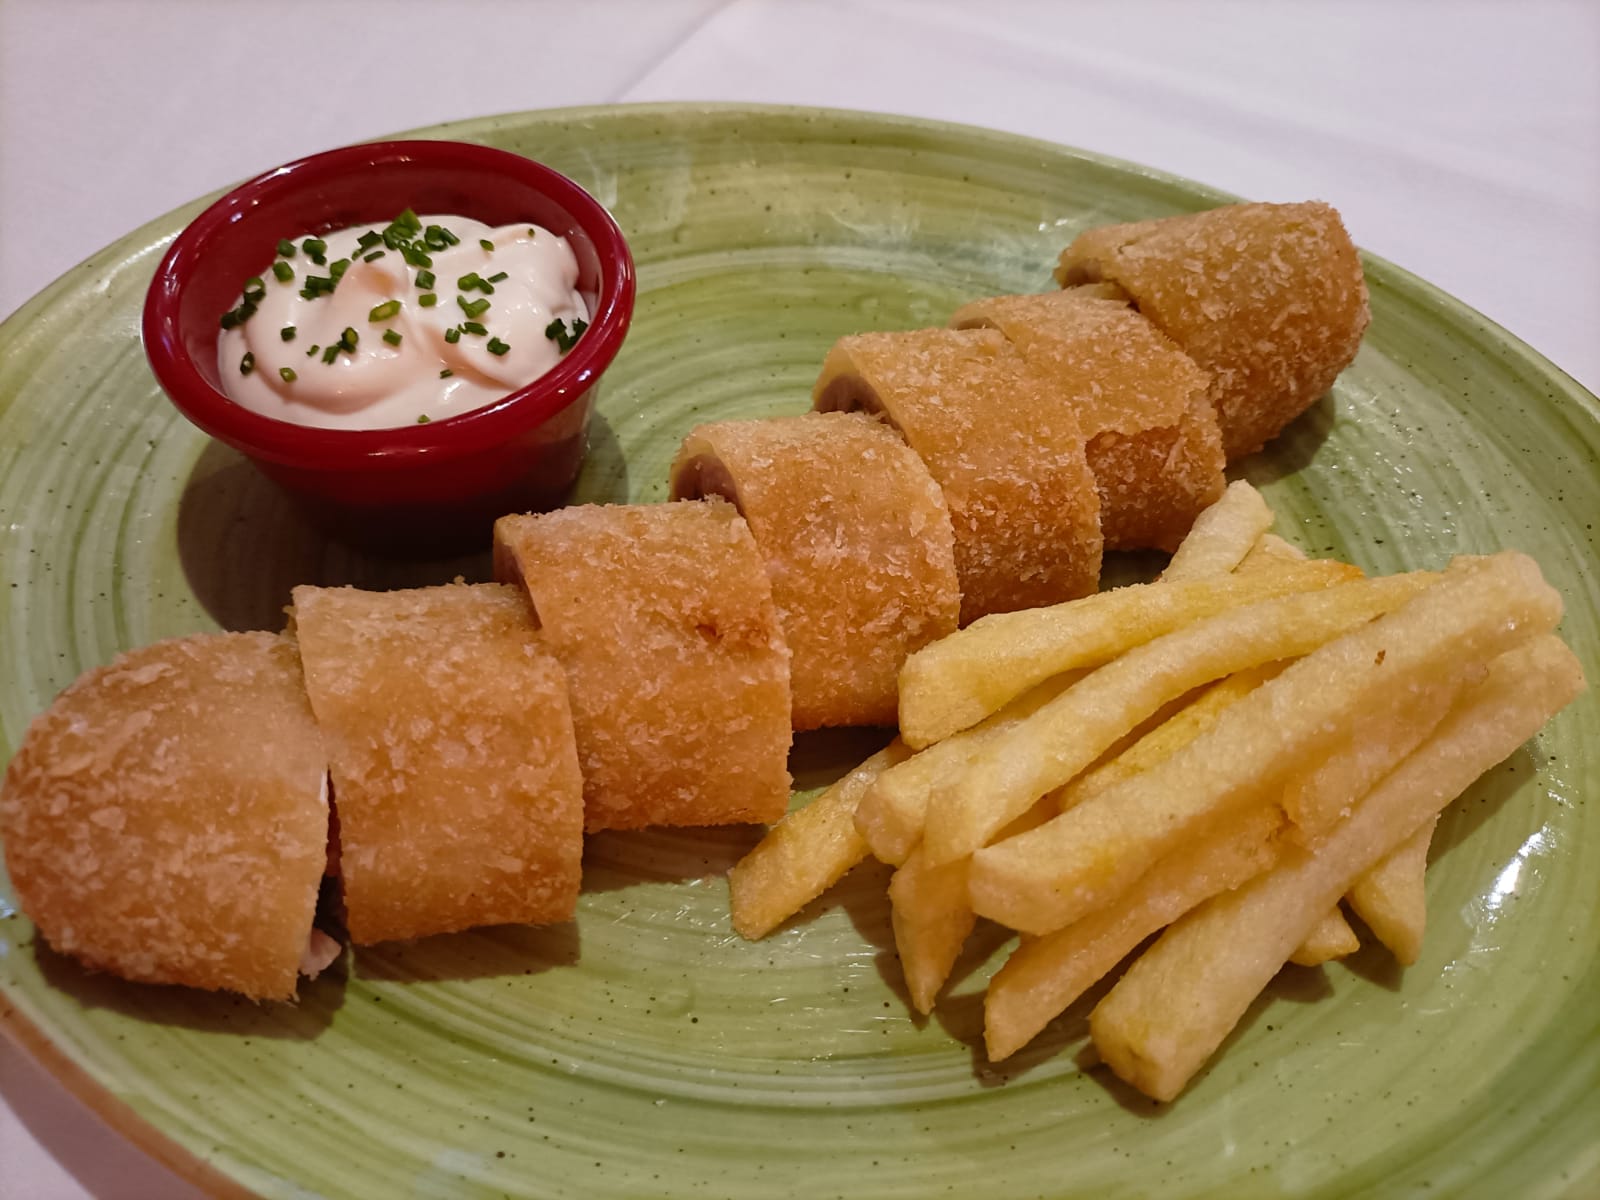 Flamenquin (Pork loin and cheese fried roll)